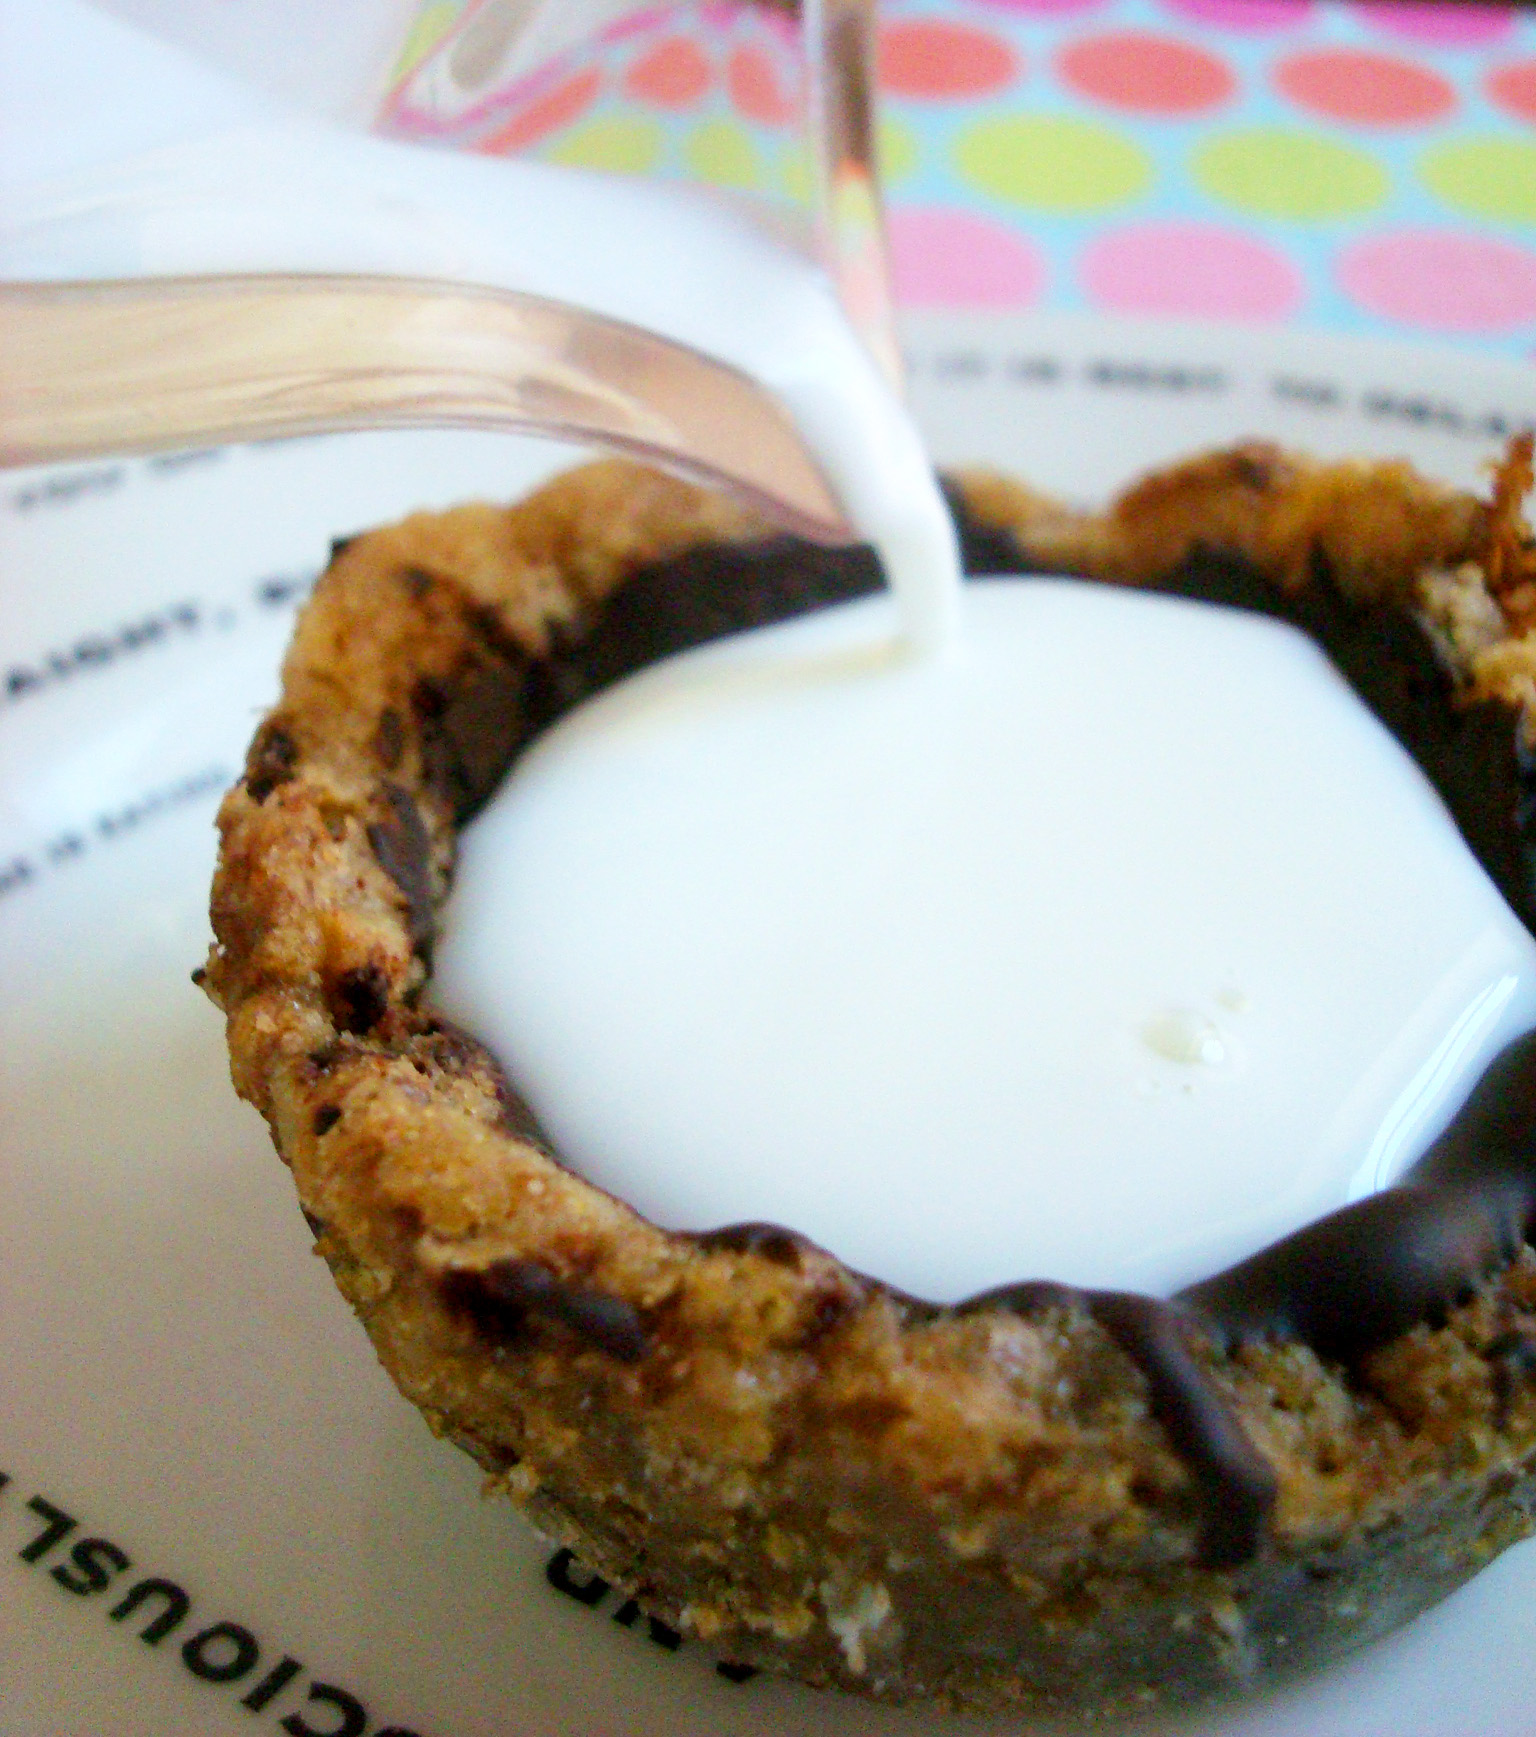 Fill your cookie cup with milk for a tasty treat